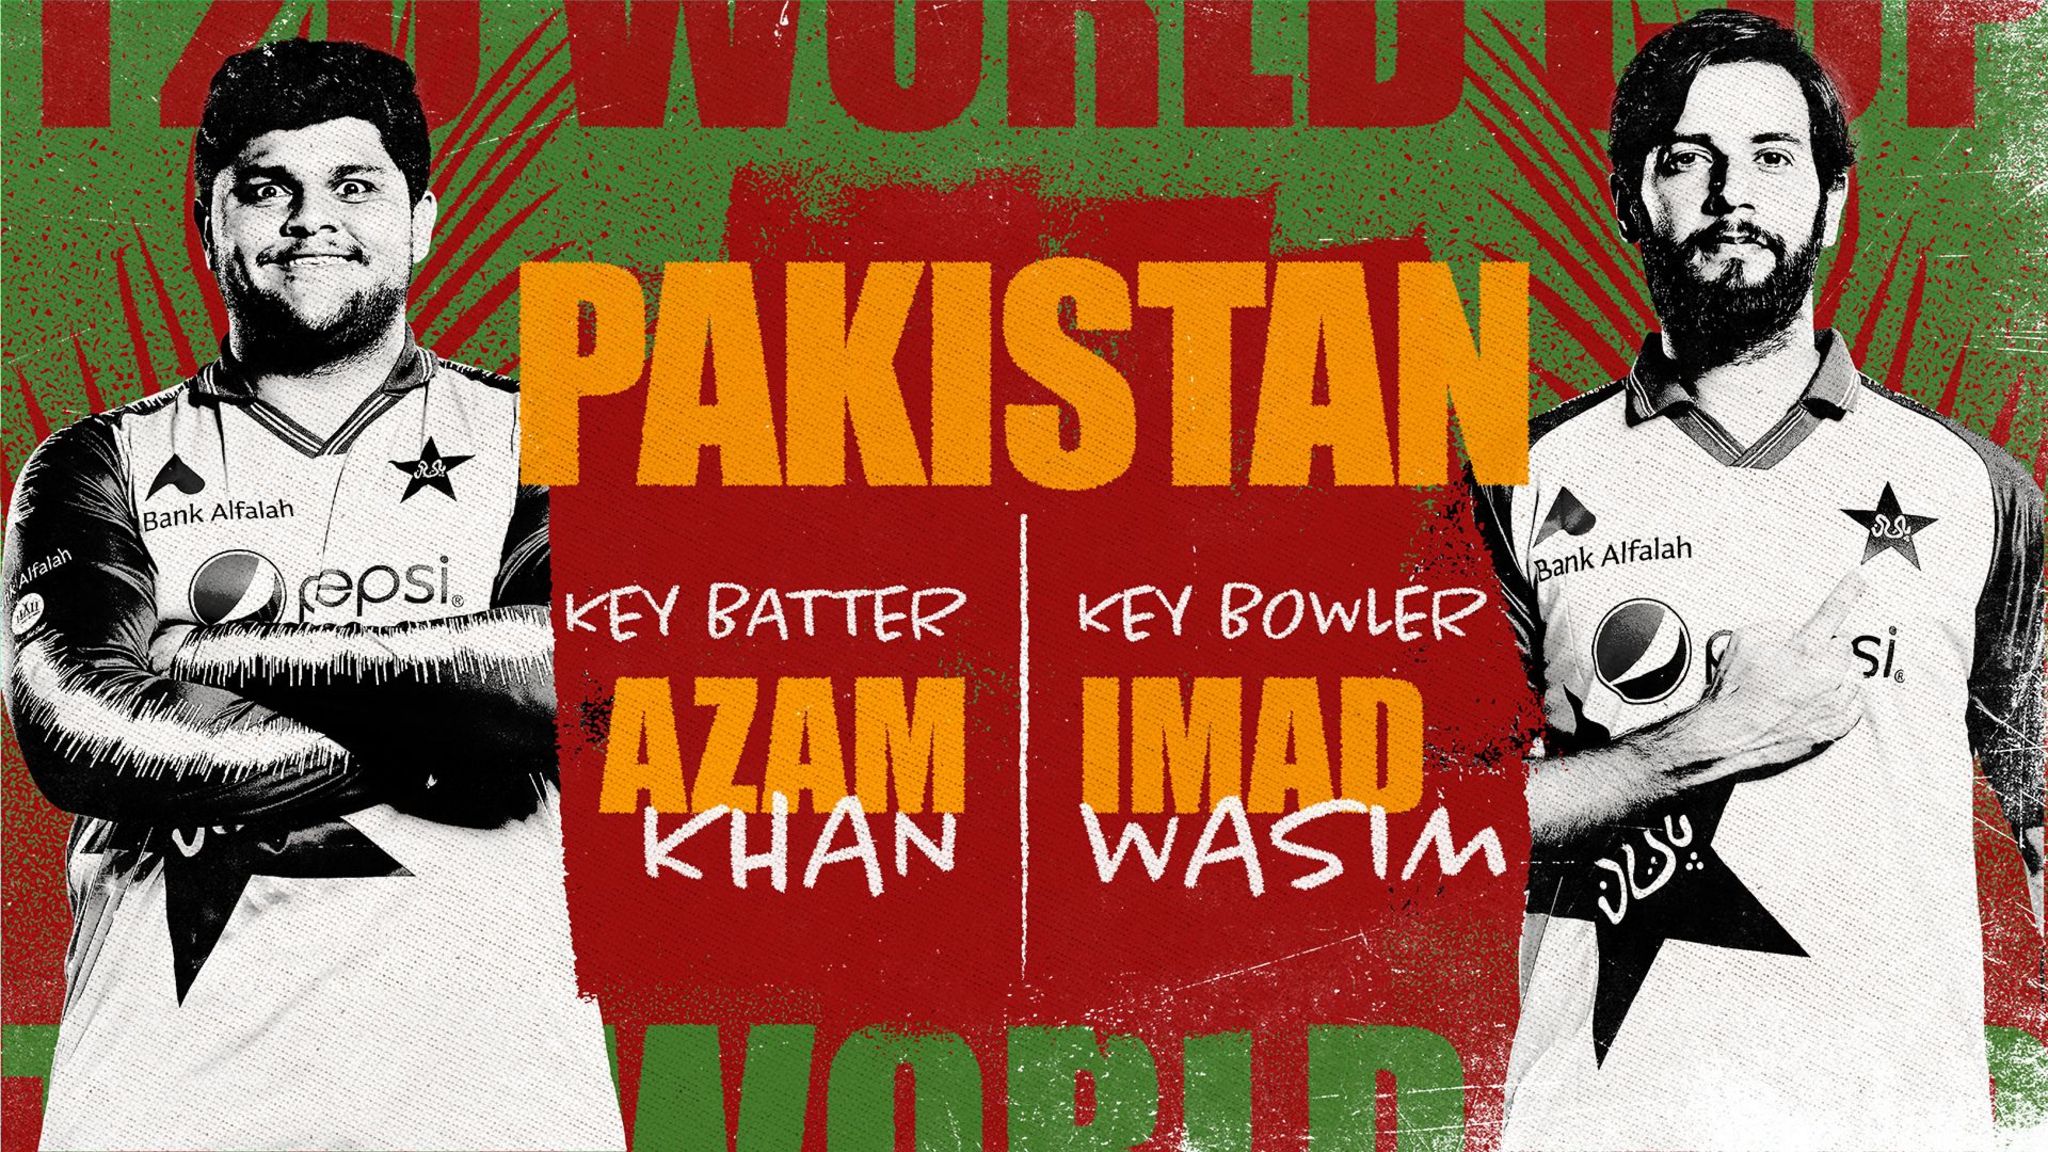 A graphic showing Azam Khan and Imad Wasim as Pakistan's key batter and bowler at the Men's T20 World Cup